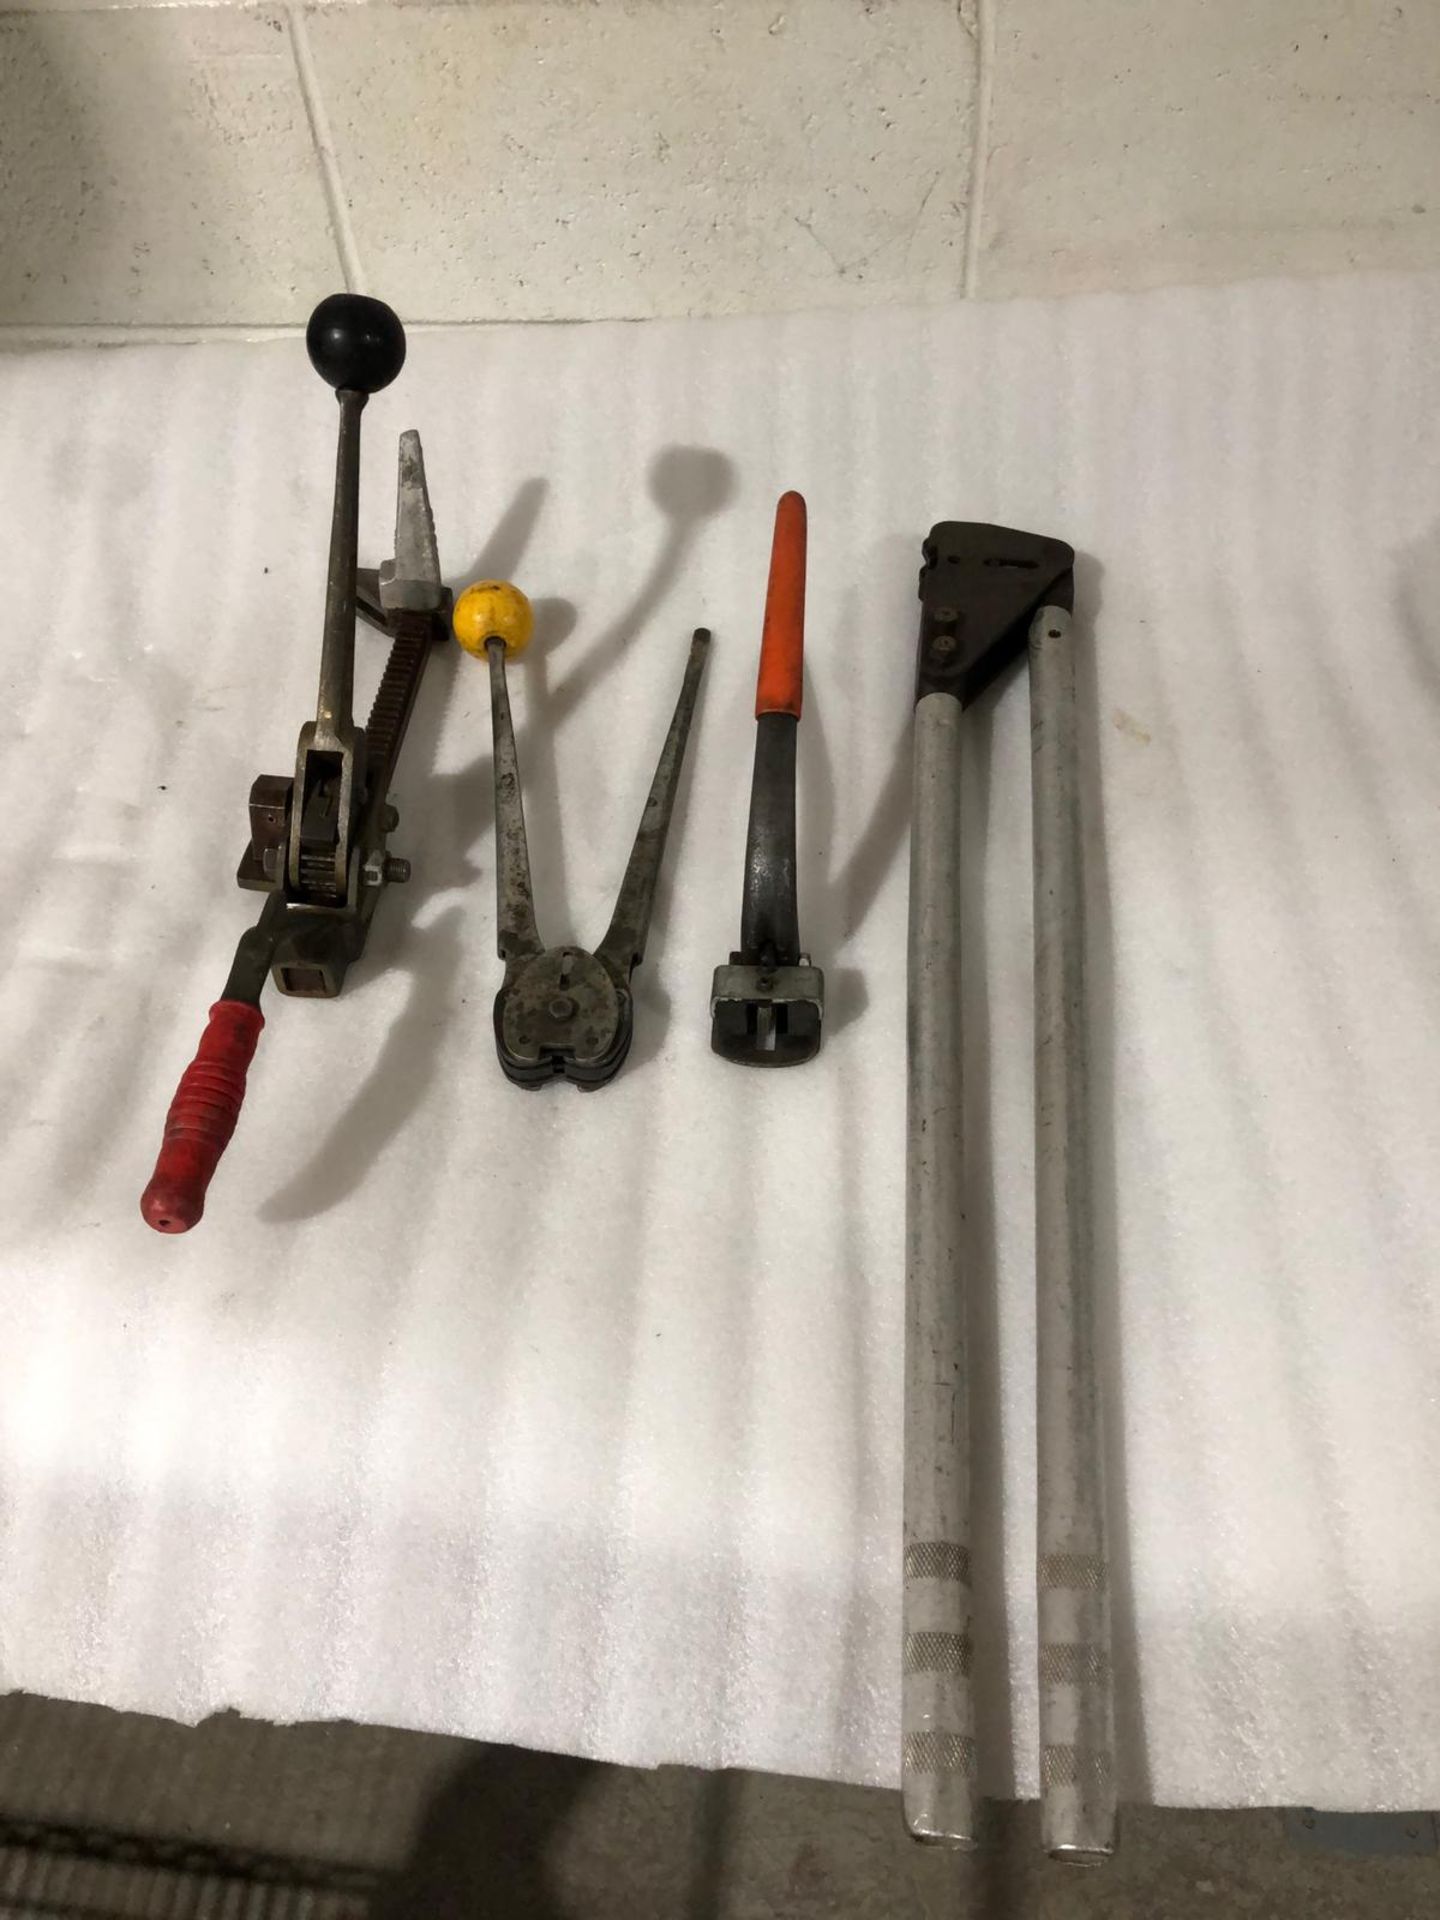 Lot of 4 (4 units) Tensioner & Crimper Units for Steel Strapping - Image 2 of 2